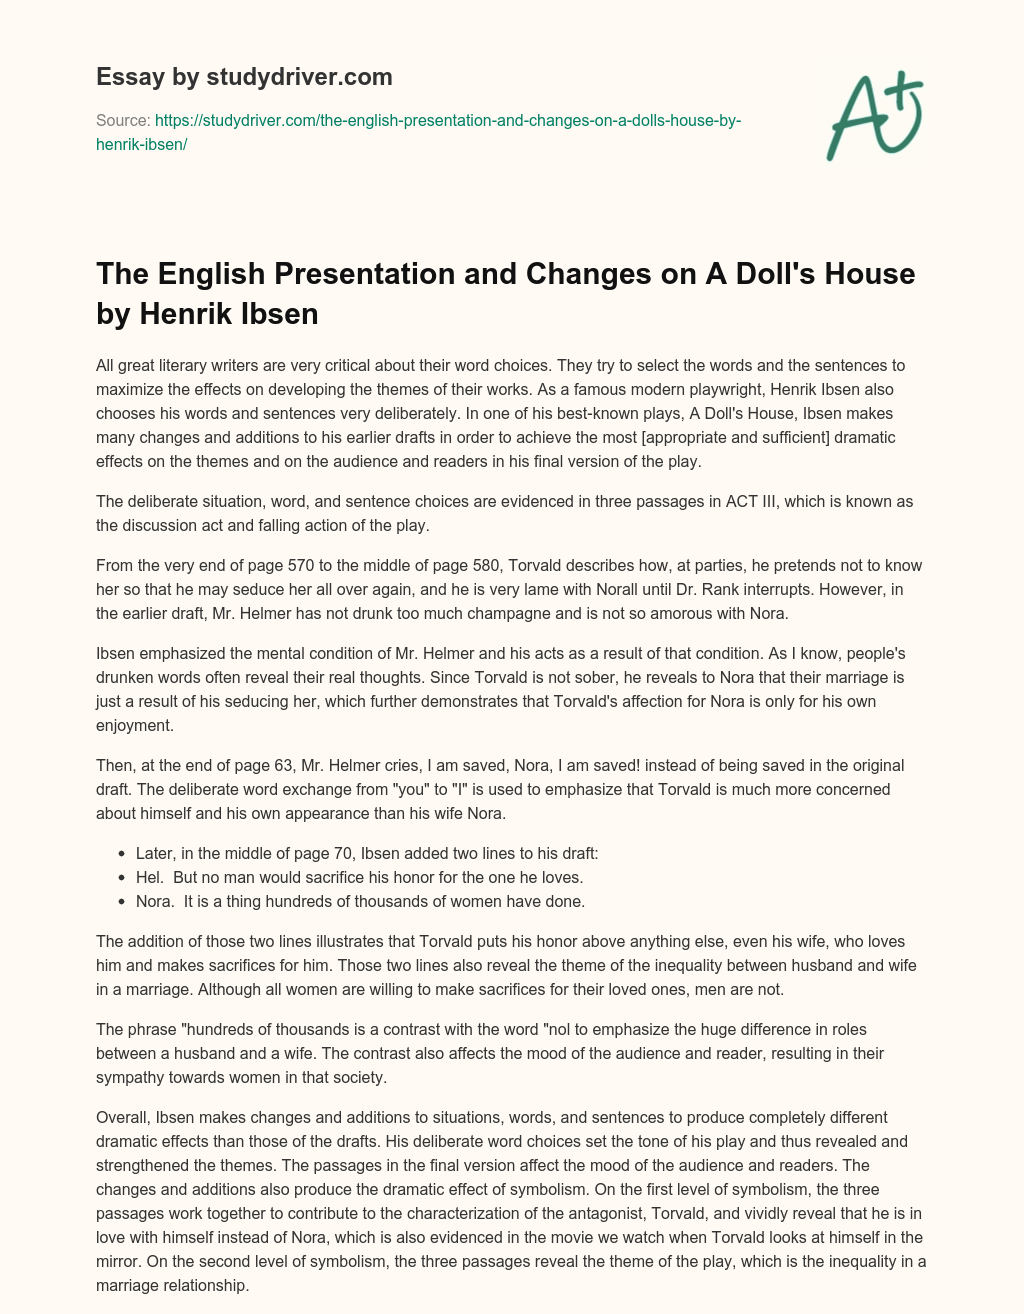 The English Presentation and Changes on a Doll’s House by Henrik Ibsen essay